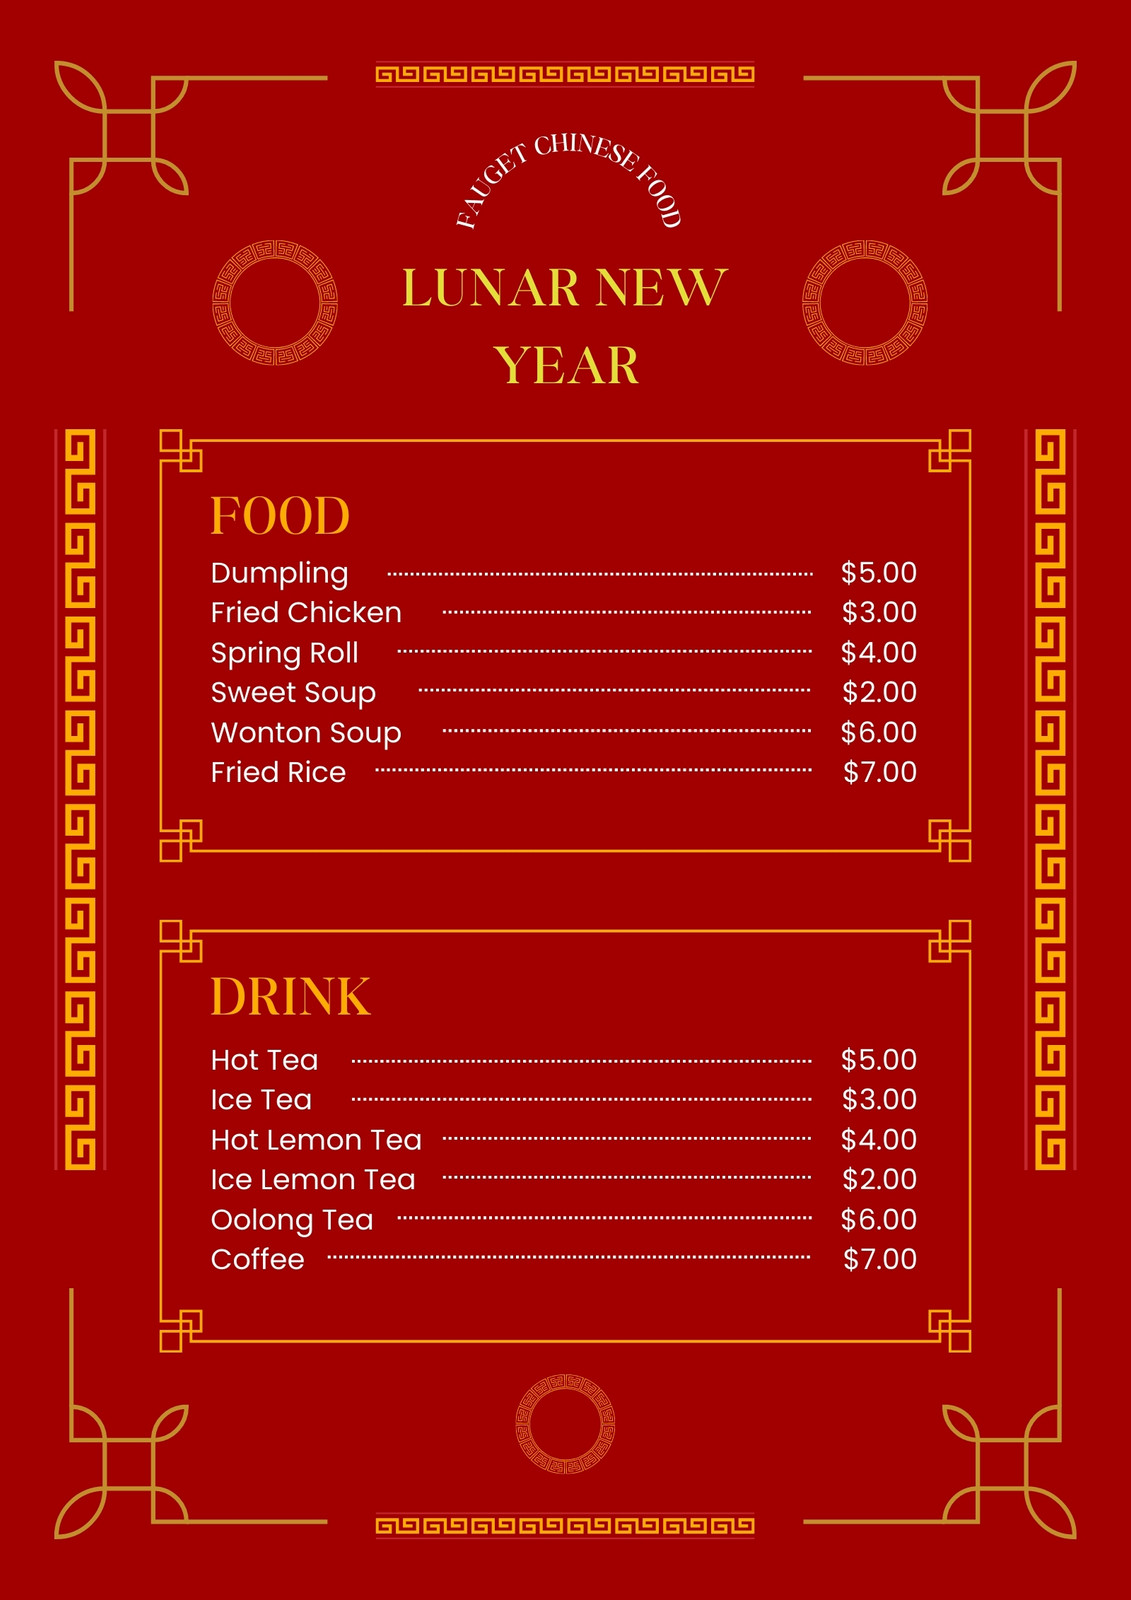 Tết Nguyên Đán is fast approaching and we know you want to make your restaurant stand out and attract more customers. That\'s why we have prepared free Lunar New Year menu templates for you! Our designs are eye-catching and reflect the joy and prosperity of the holiday. Download them now and make your menu shine! 